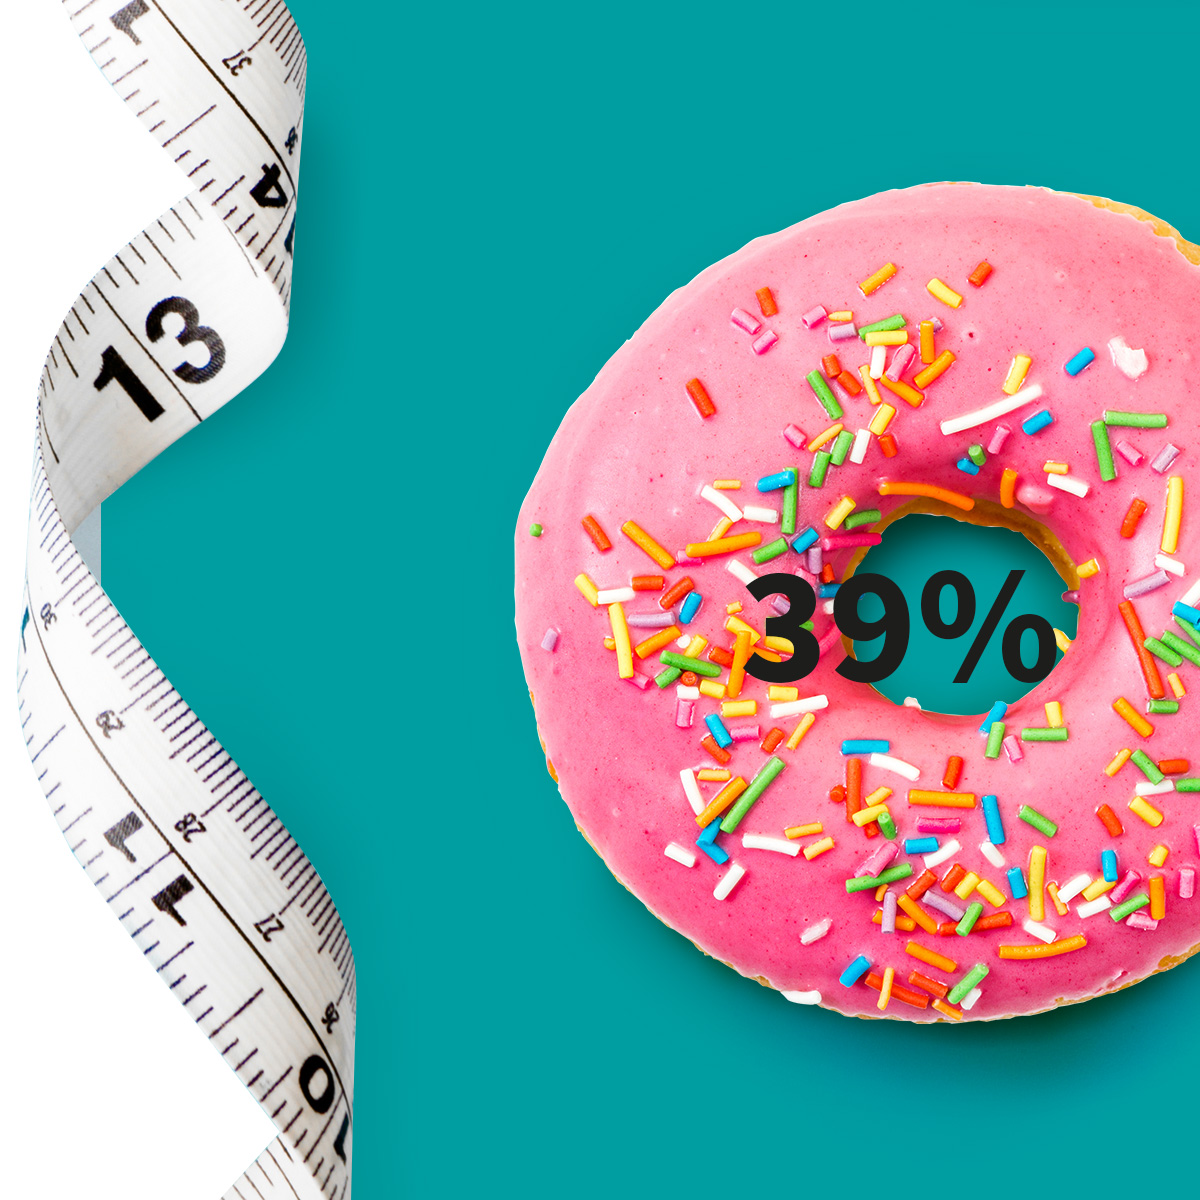 [.NL-en Netherlands (english)] •	A measuring tape and a doughnut with pink icing and colourful sugar sprinkle as a metaphor for obesity